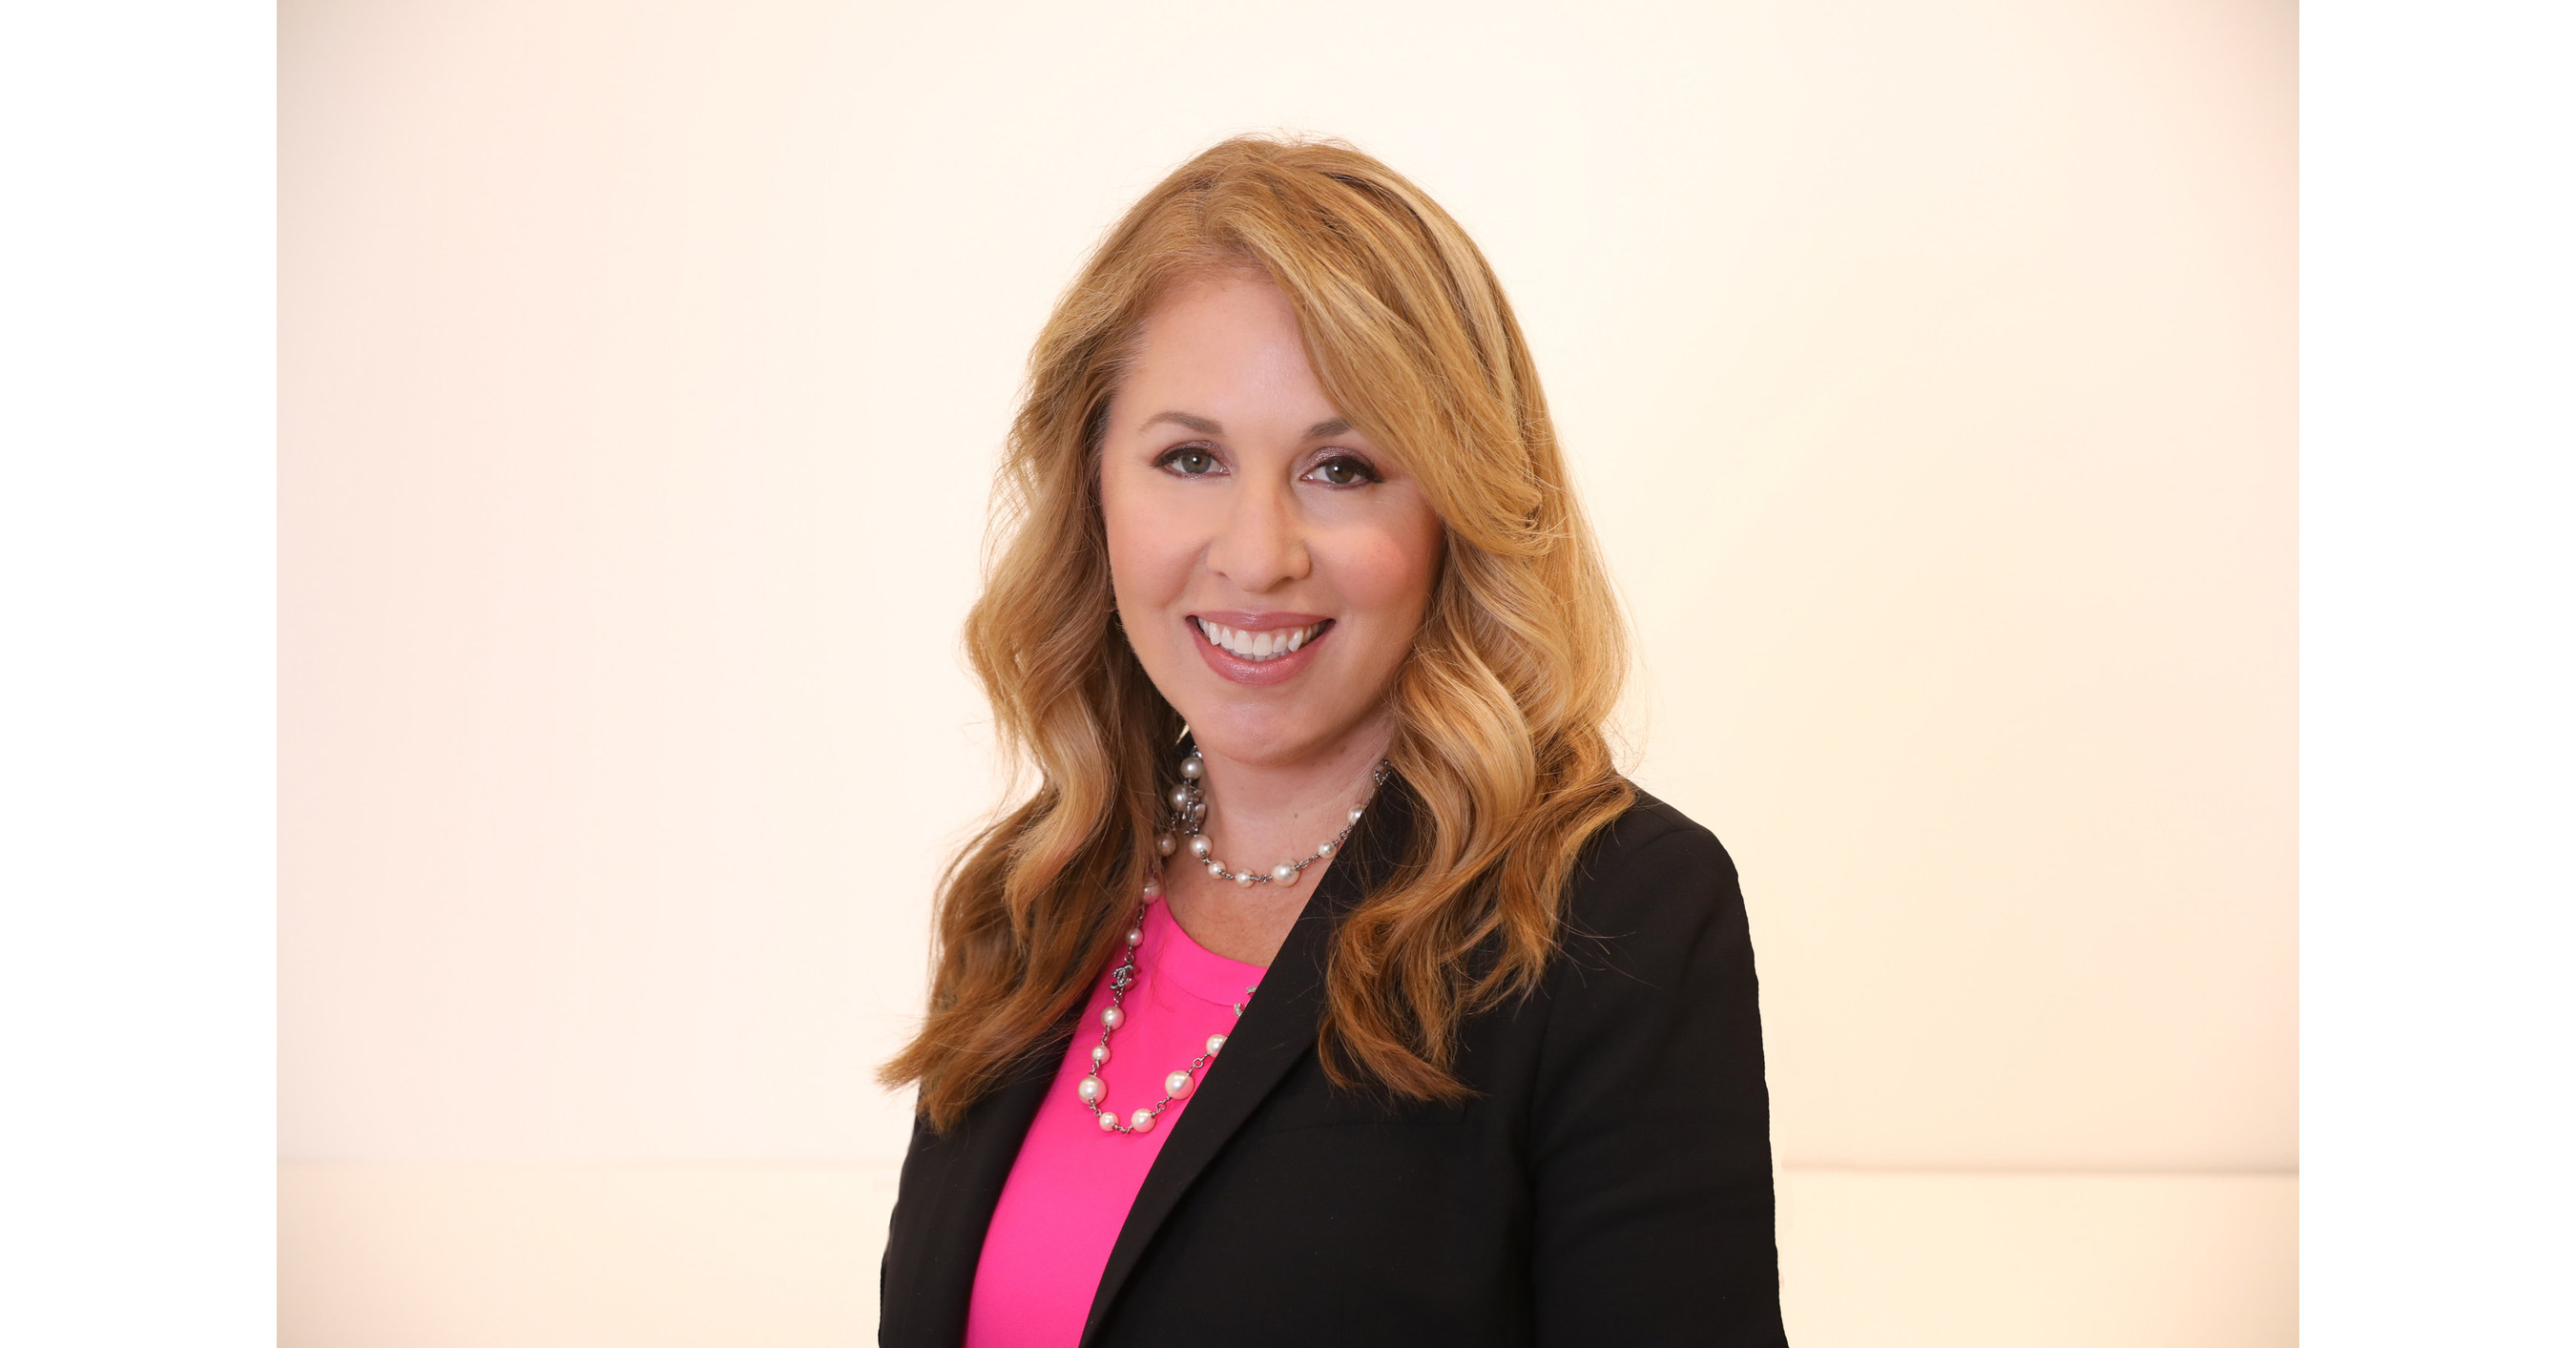 Curology Appoints Heather Wallace as Chief Executive Officer